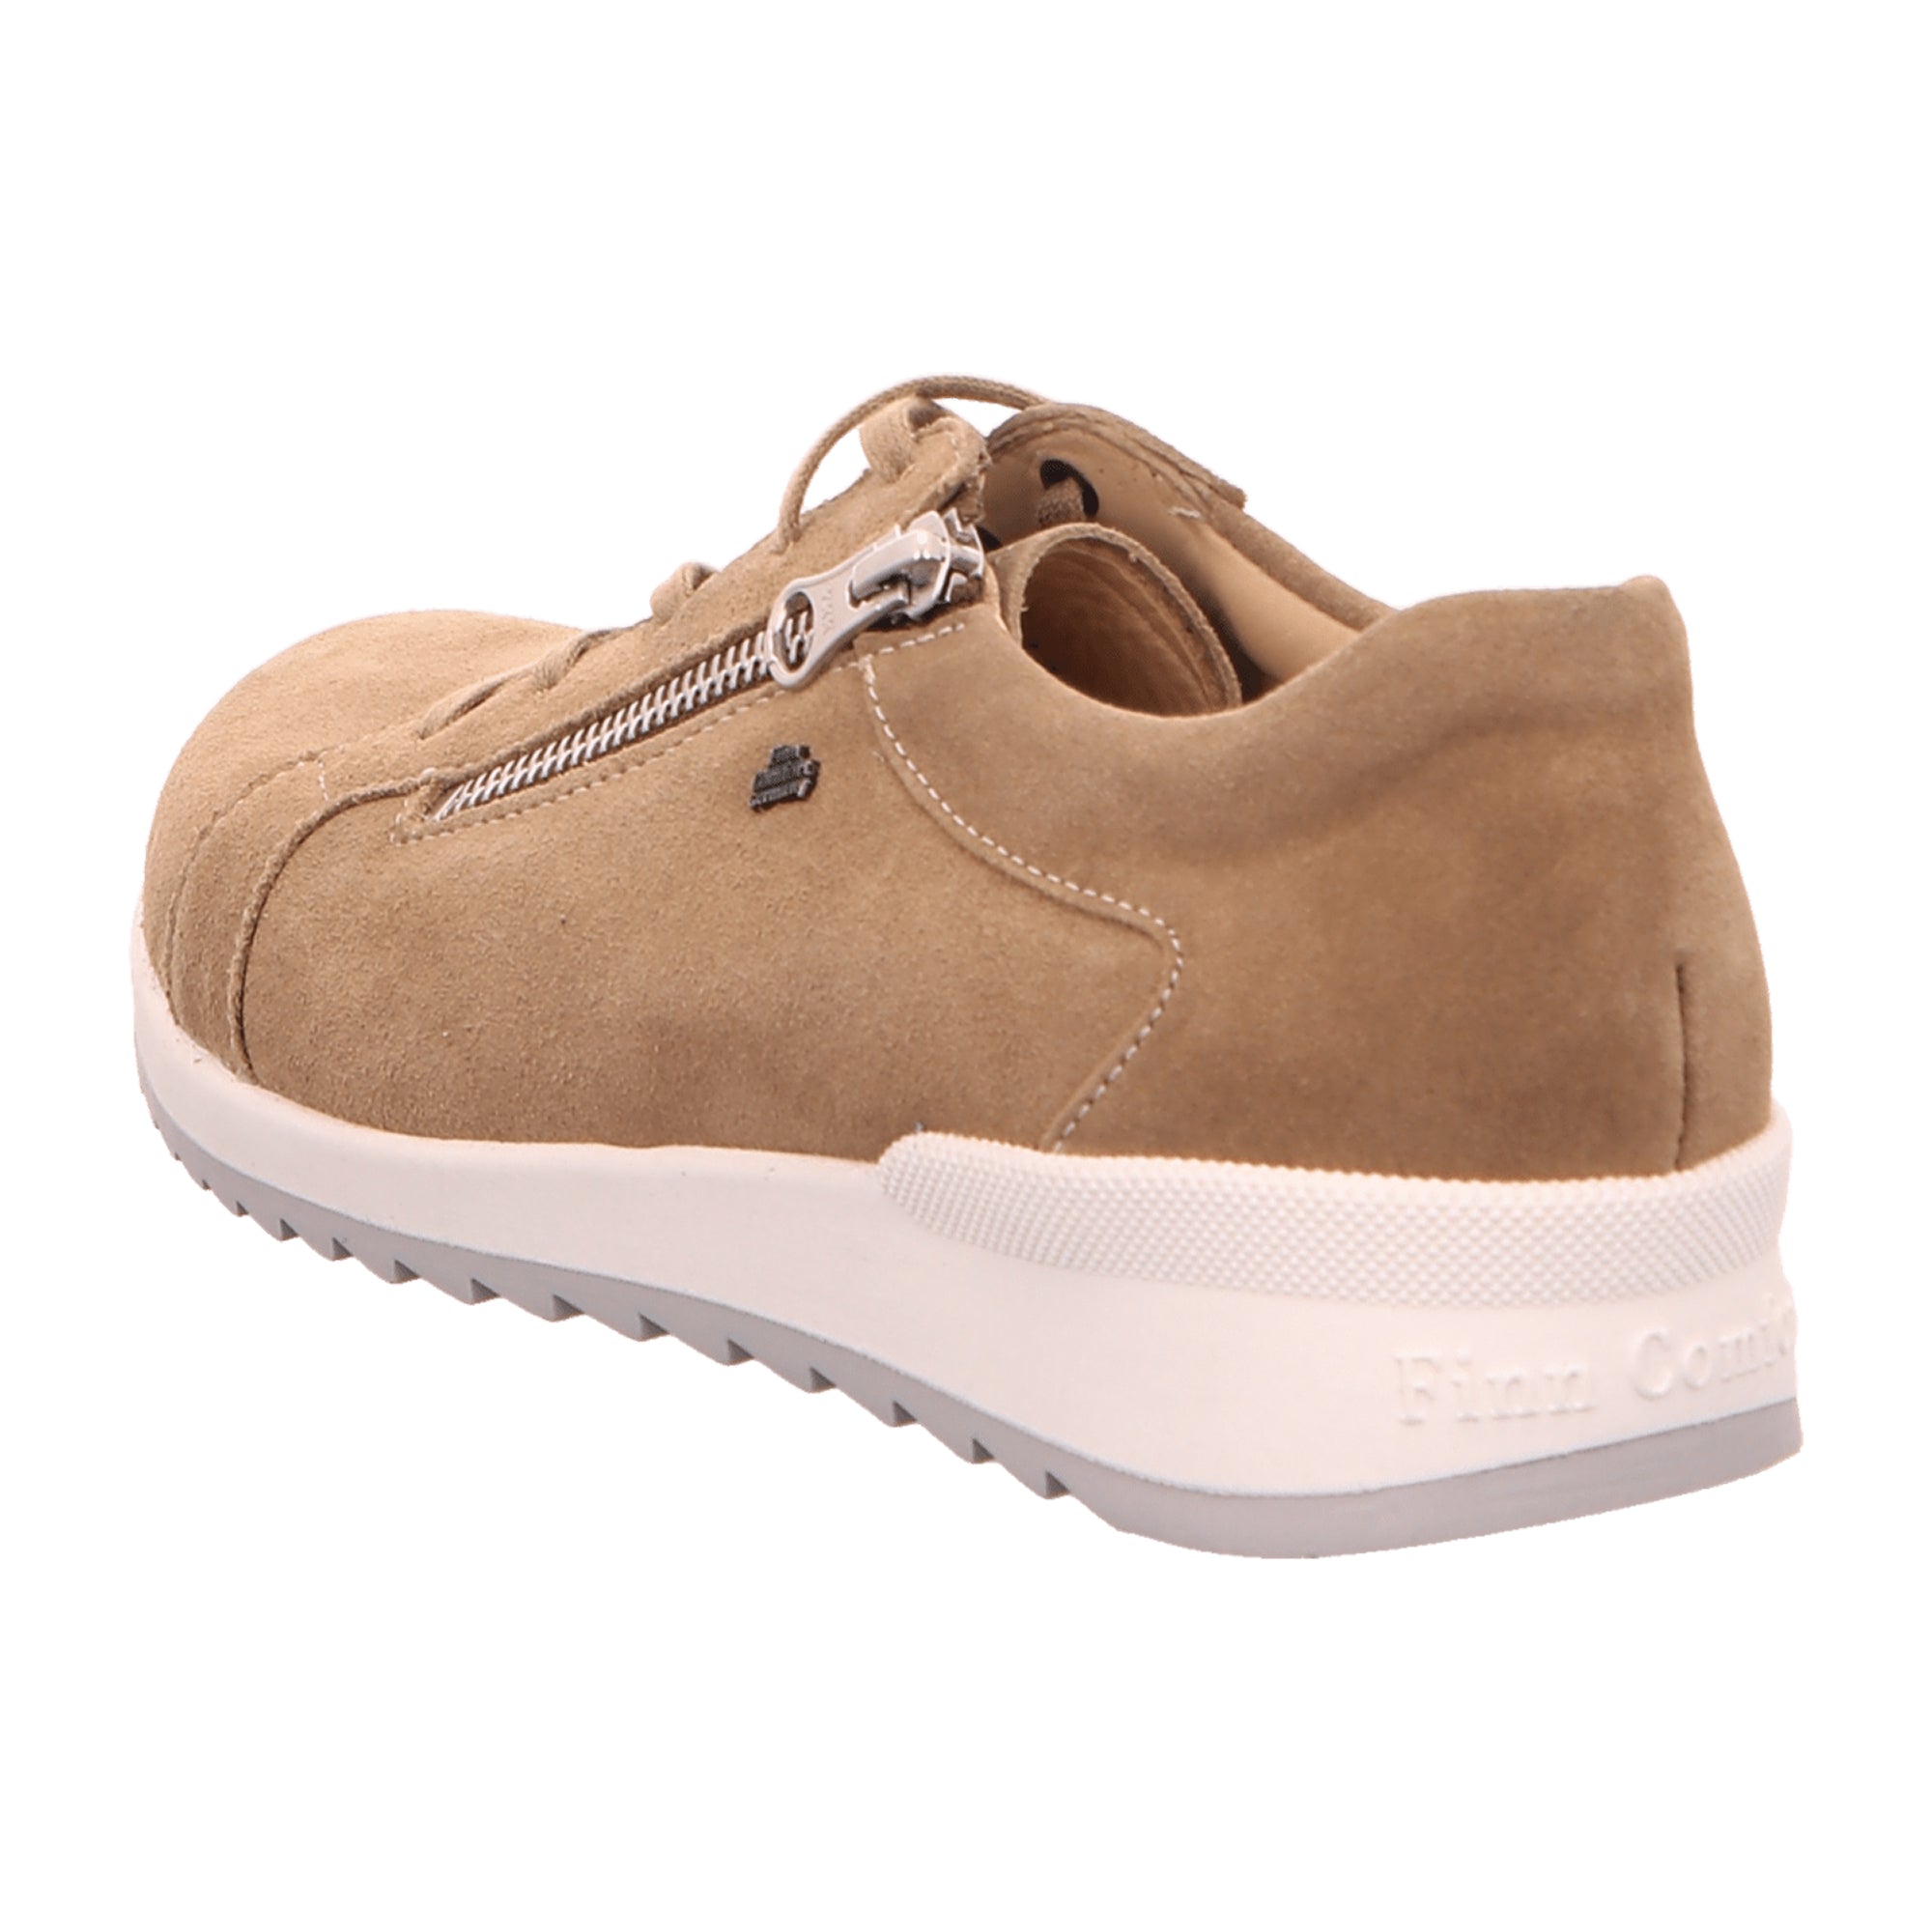 Finn Comfort Barretos Women's Comfort Shoes in Taupe Beige - Stylish and Durable